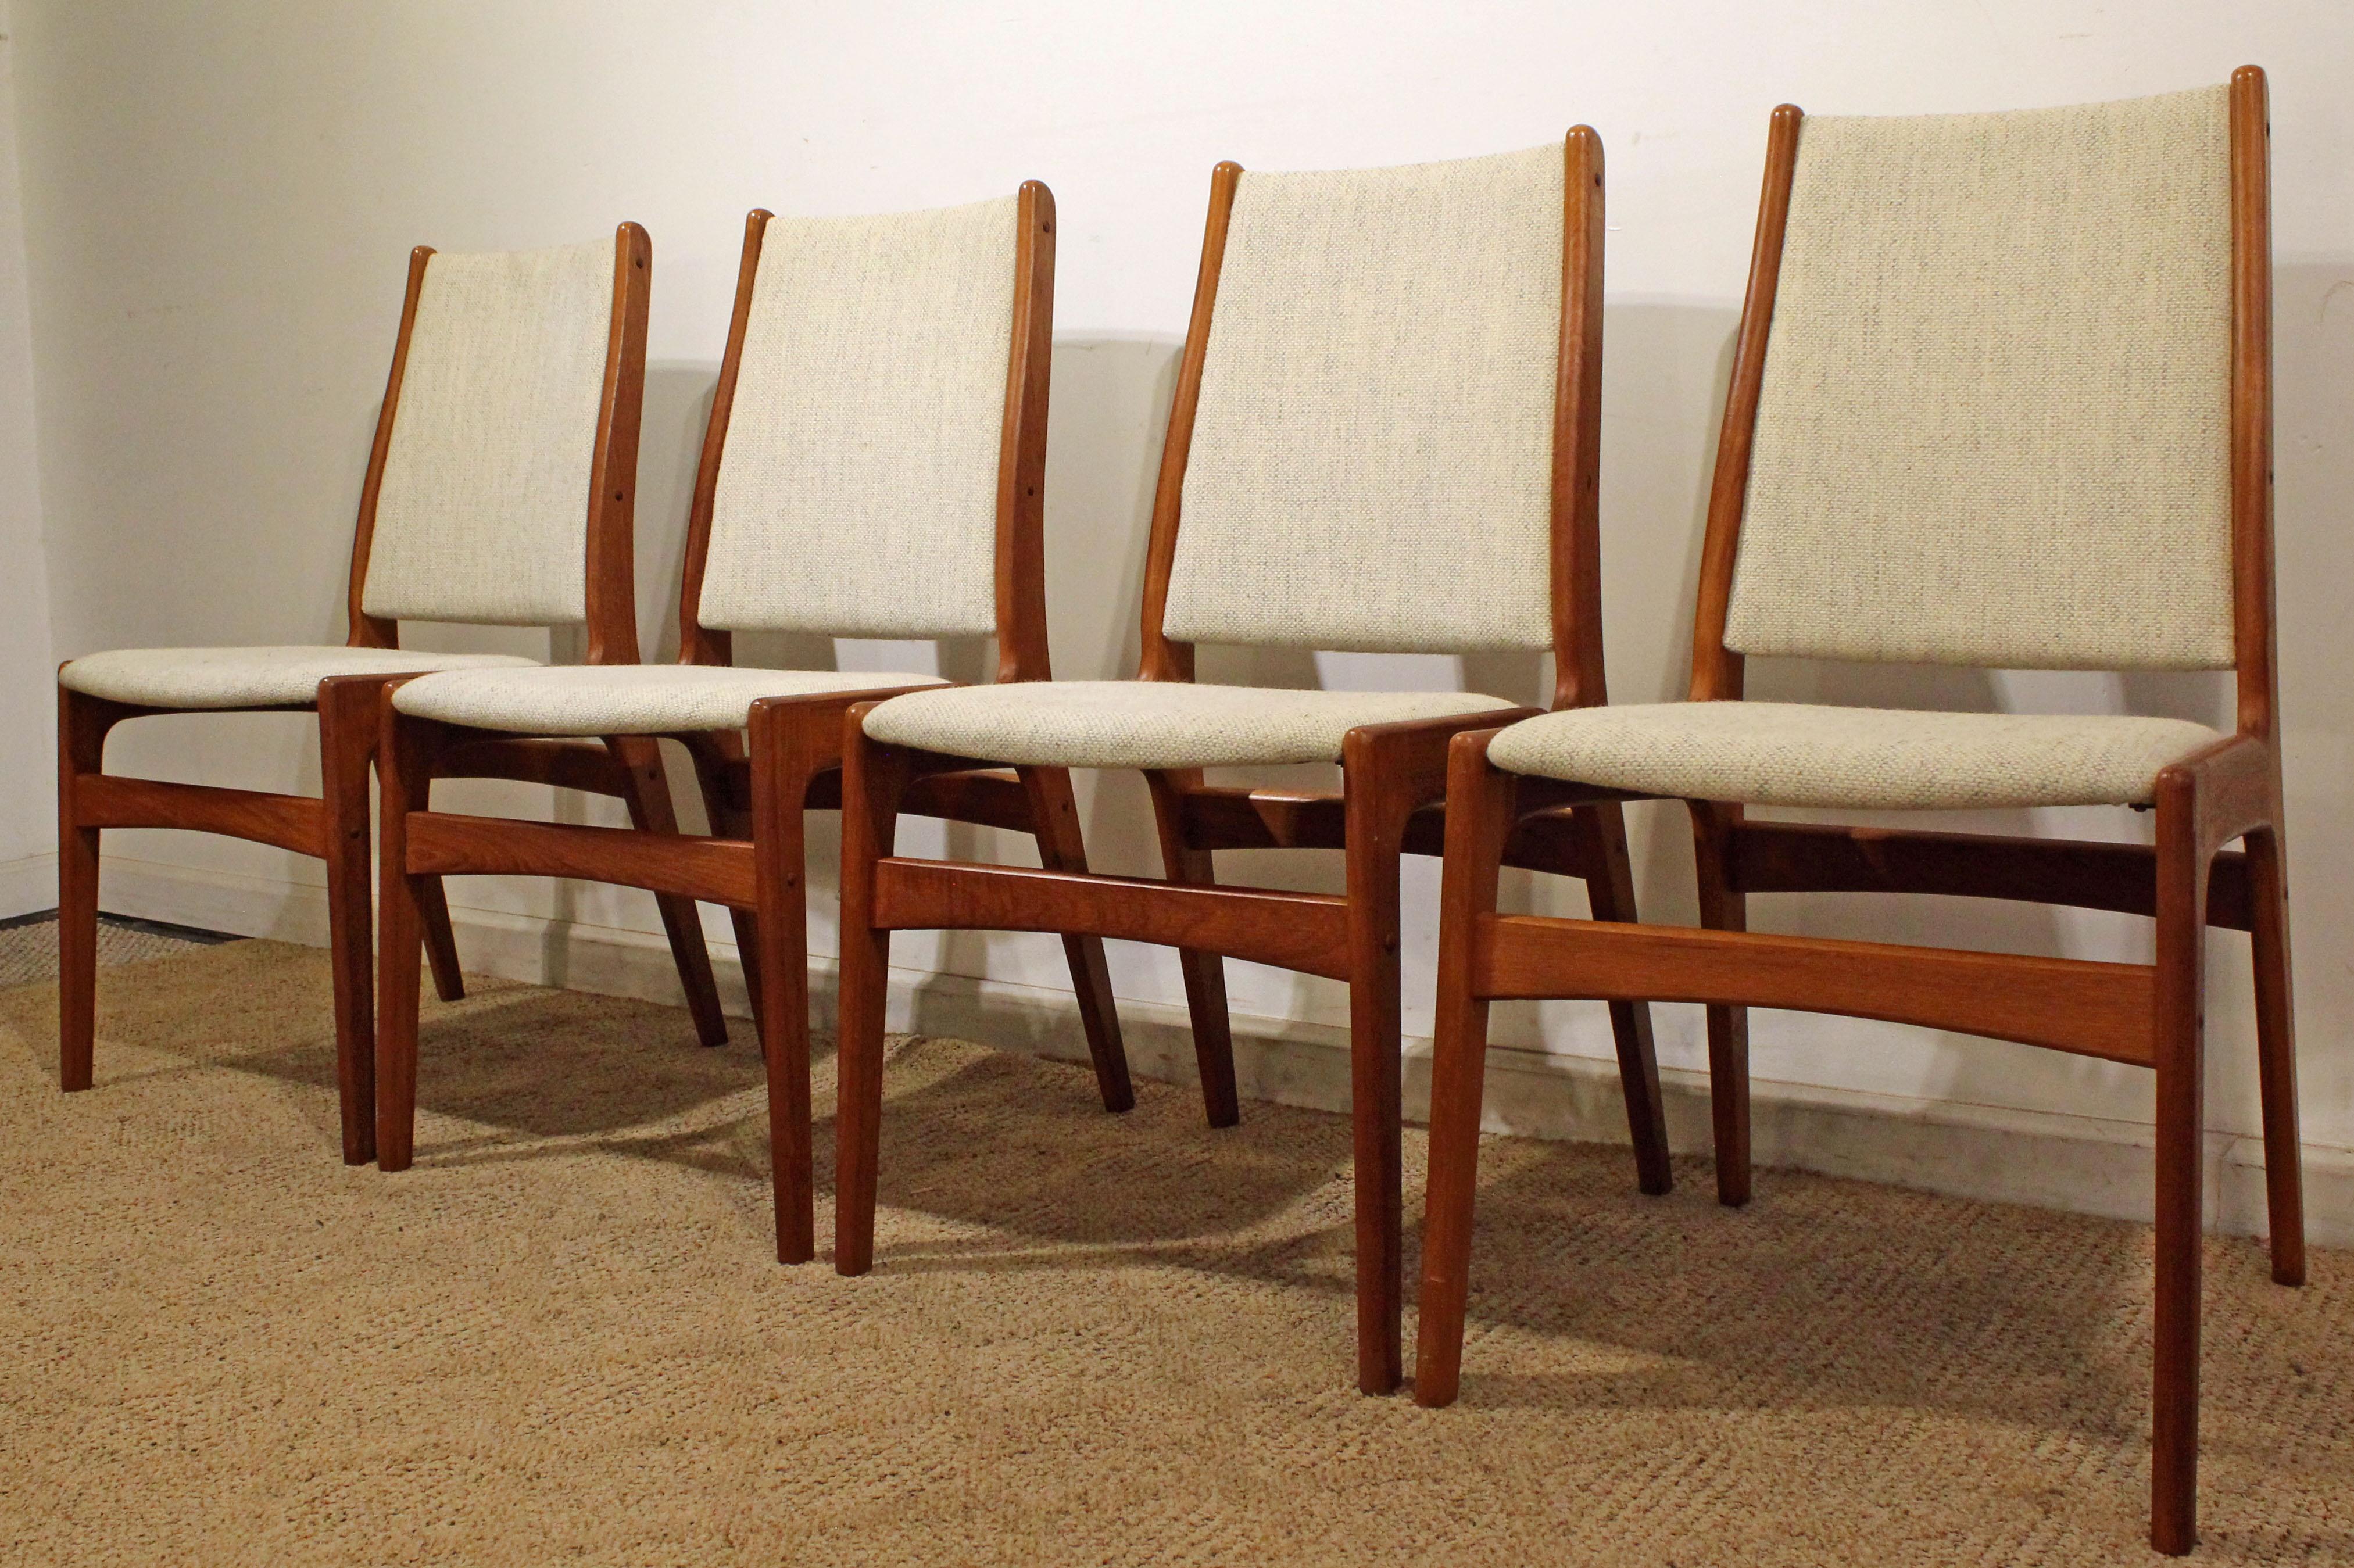 Offered is a Danish Modern set of six dining chairs, made by Anderstrup Mobelfabrik. This set includes four teak side chairs. They are in good condition, show normal age wear. They are signed. A great set to add to your home. 

Dimensions:
19